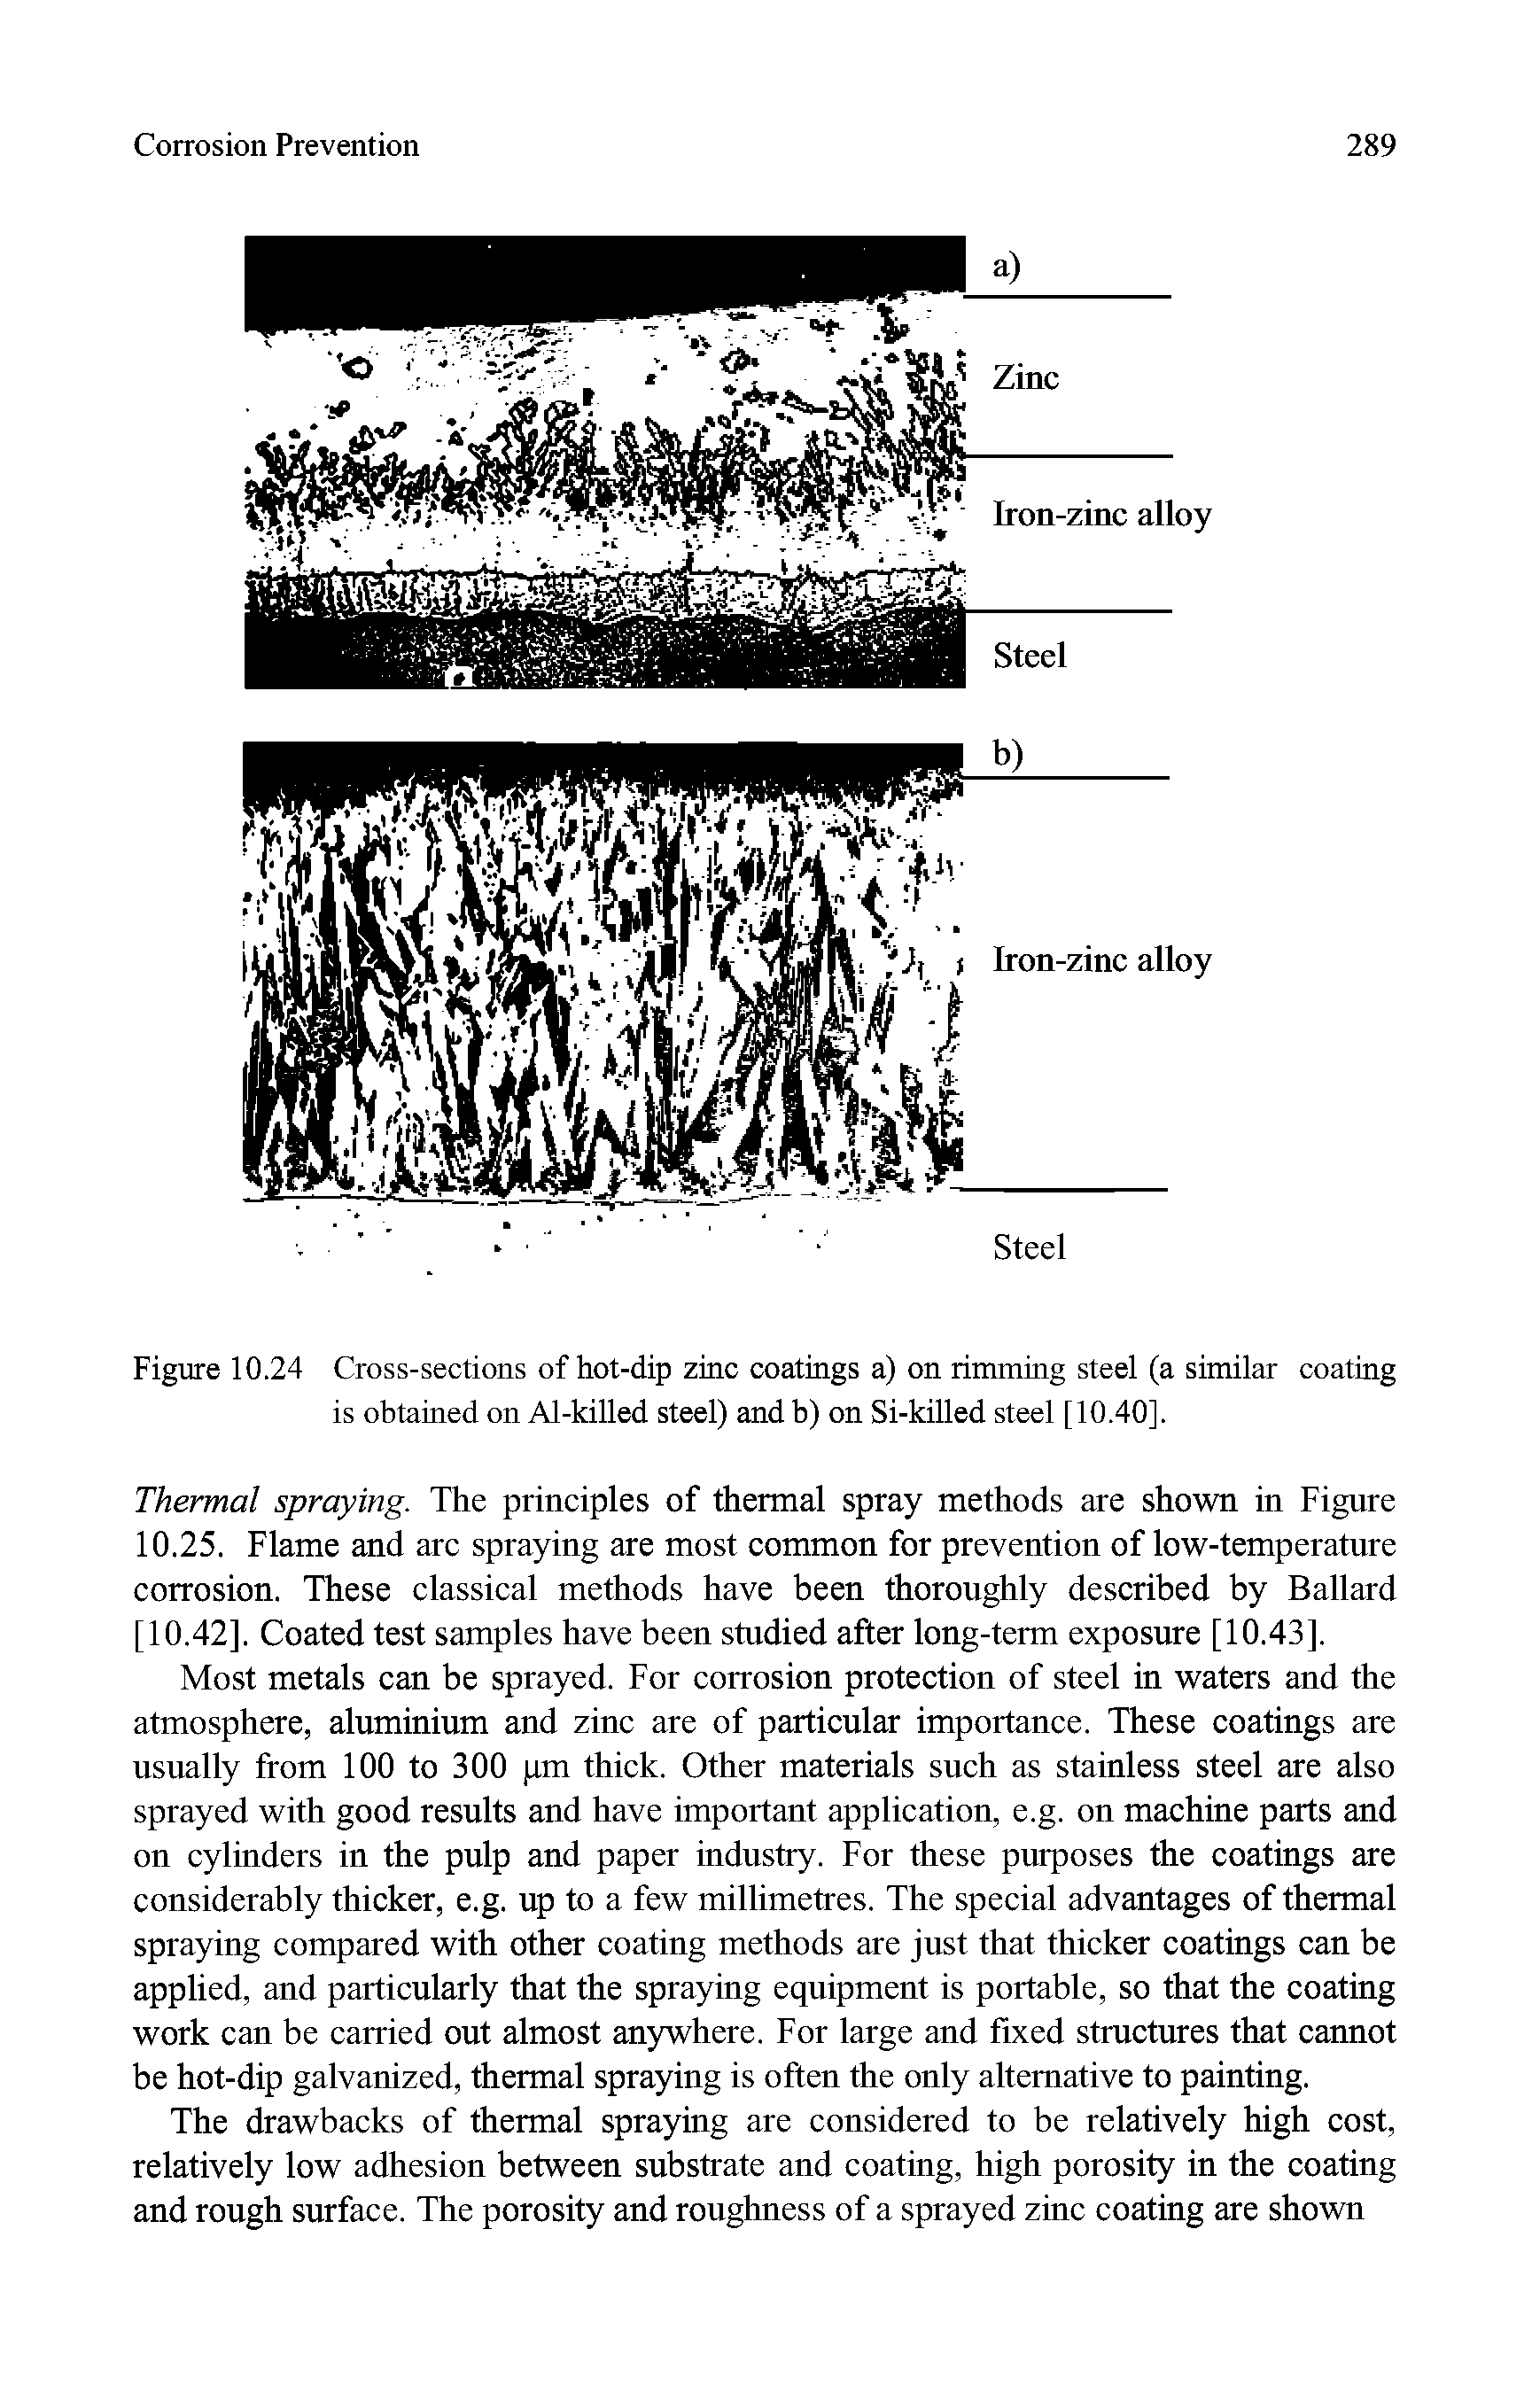 Figure 10.24 Cross-sections of hot-dip zinc coatings a) on rimming steel (a similar coating is obtained on Al-kiUed steel) and b) on Si-kUled steel [10.40],...